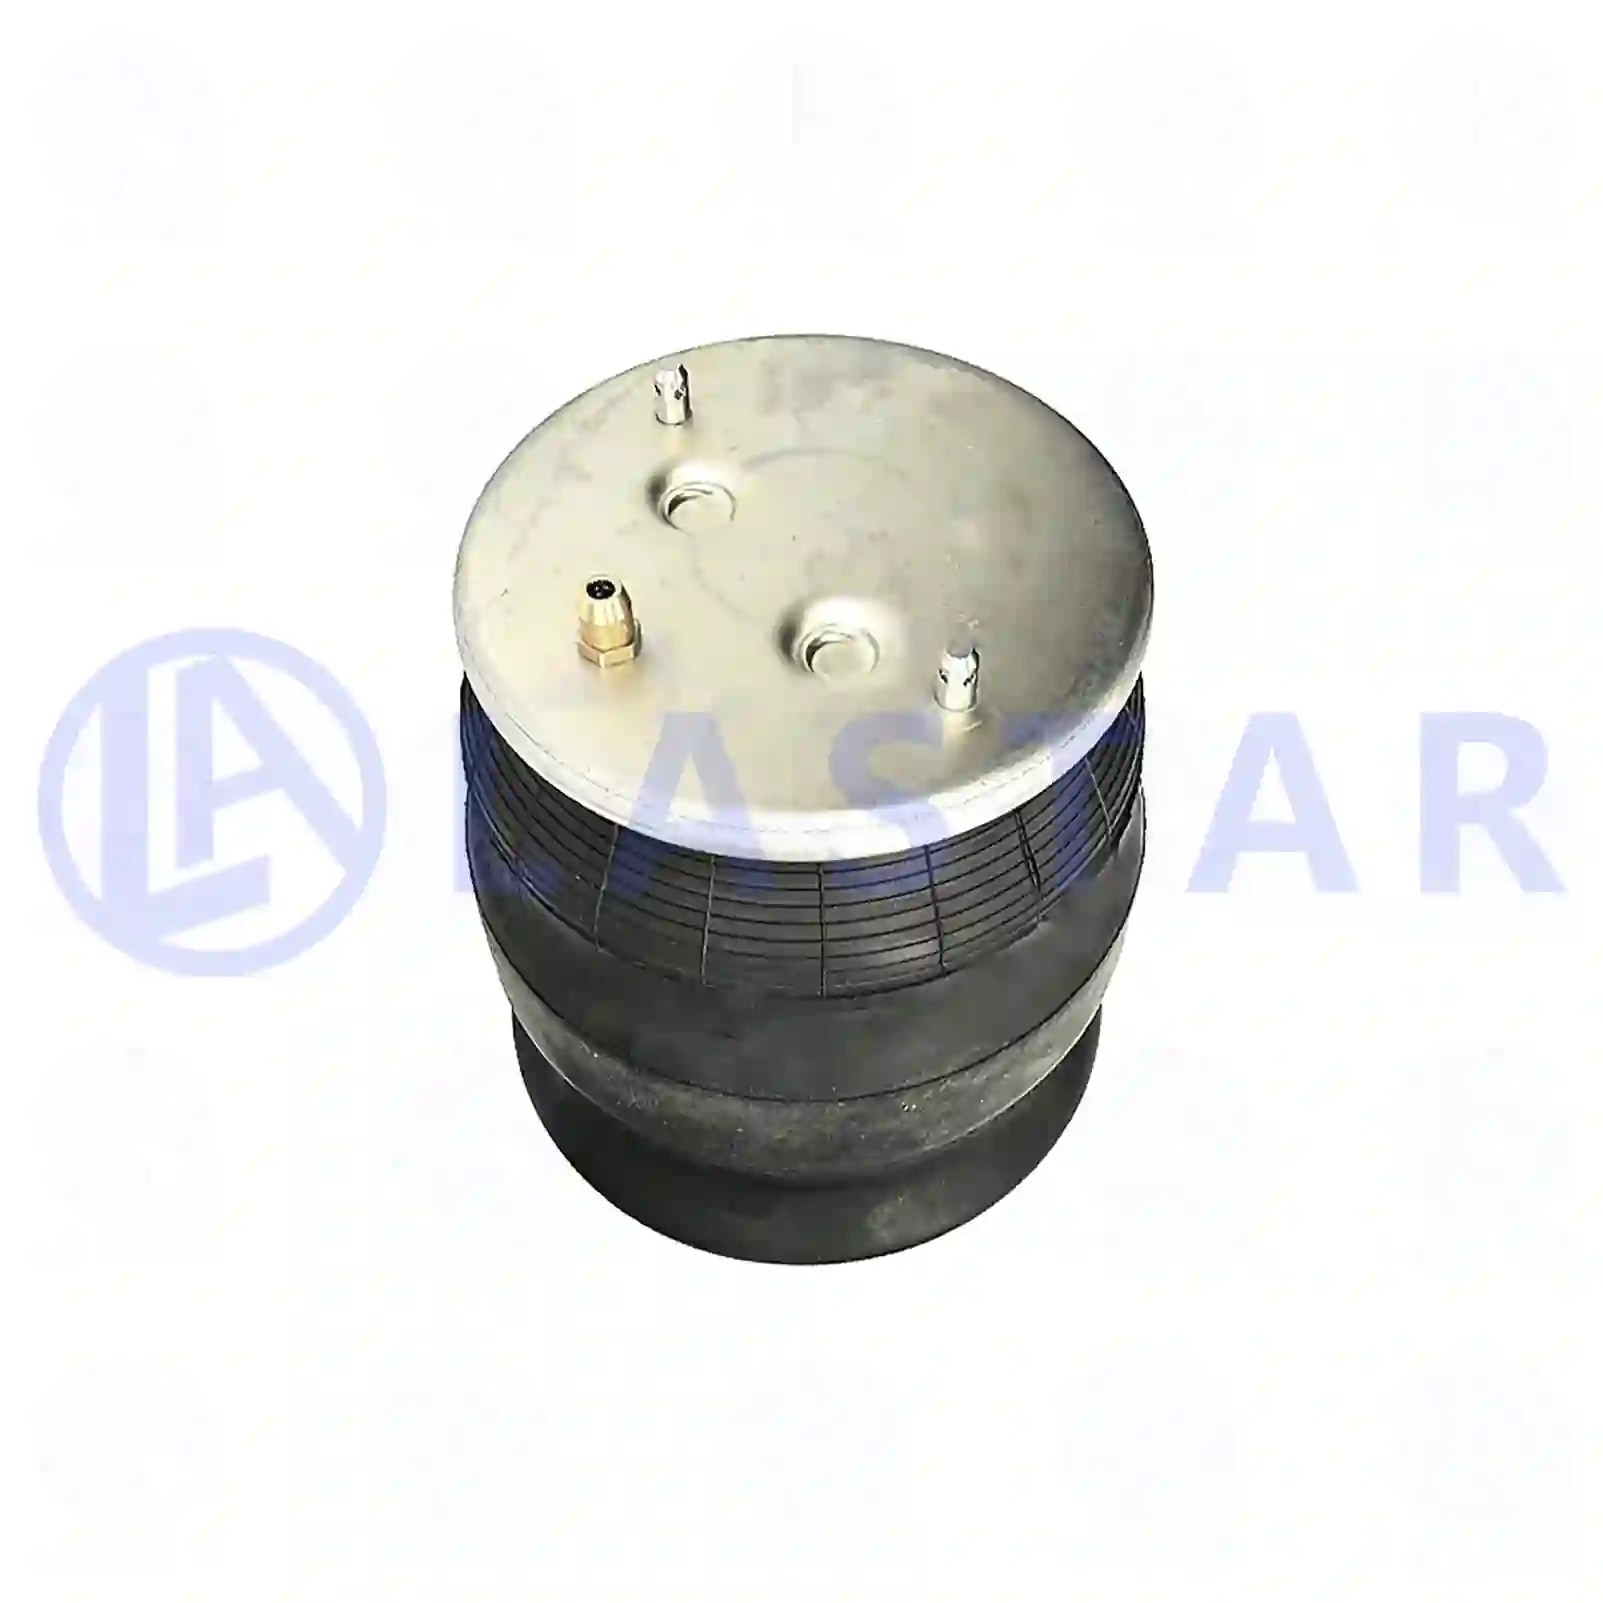 Air spring, with steel piston, 77729688, 1362147, 1370744, 1386200, ZG40732-0008 ||  77729688 Lastar Spare Part | Truck Spare Parts, Auotomotive Spare Parts Air spring, with steel piston, 77729688, 1362147, 1370744, 1386200, ZG40732-0008 ||  77729688 Lastar Spare Part | Truck Spare Parts, Auotomotive Spare Parts